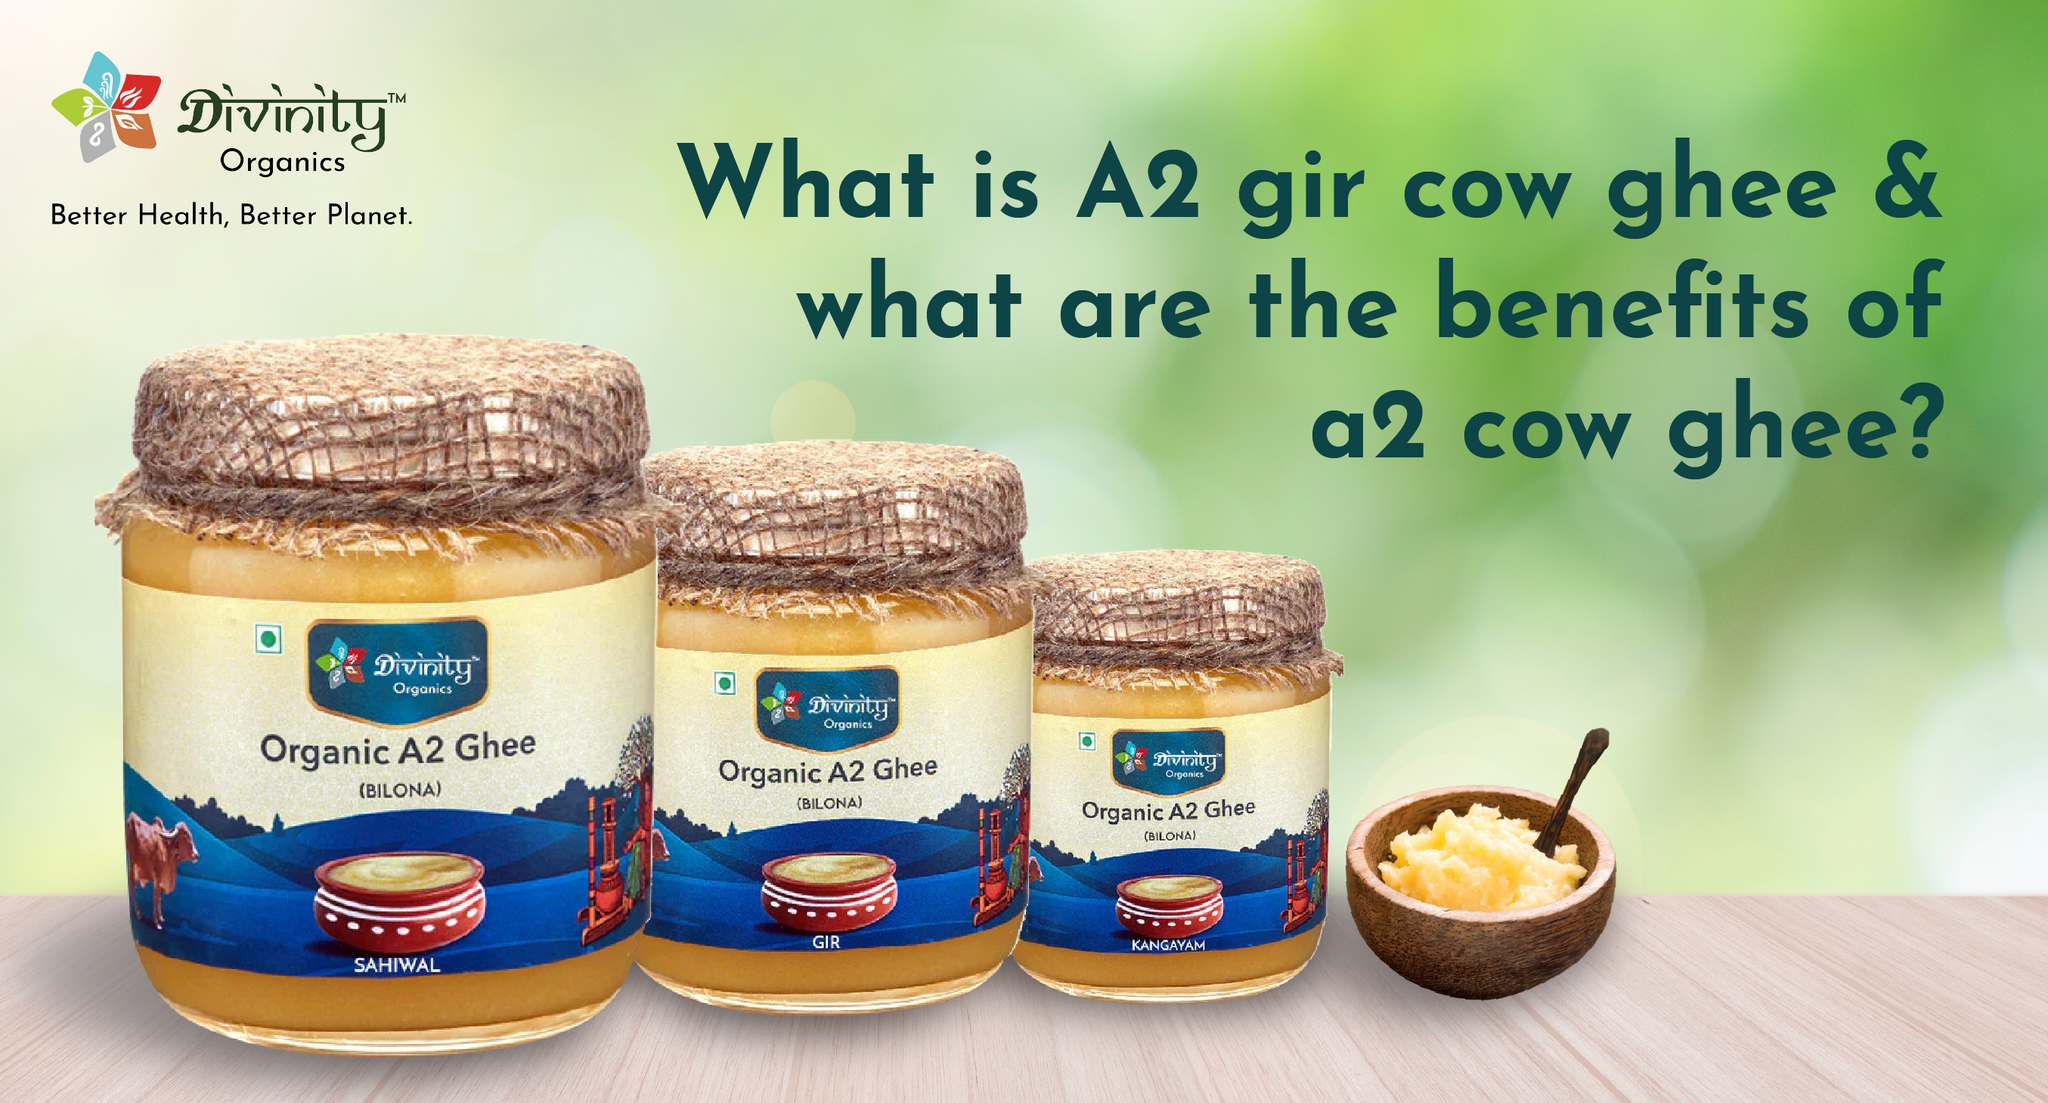 What is A2 gir cow ghee and what are the benefits of a2 cow ghee?